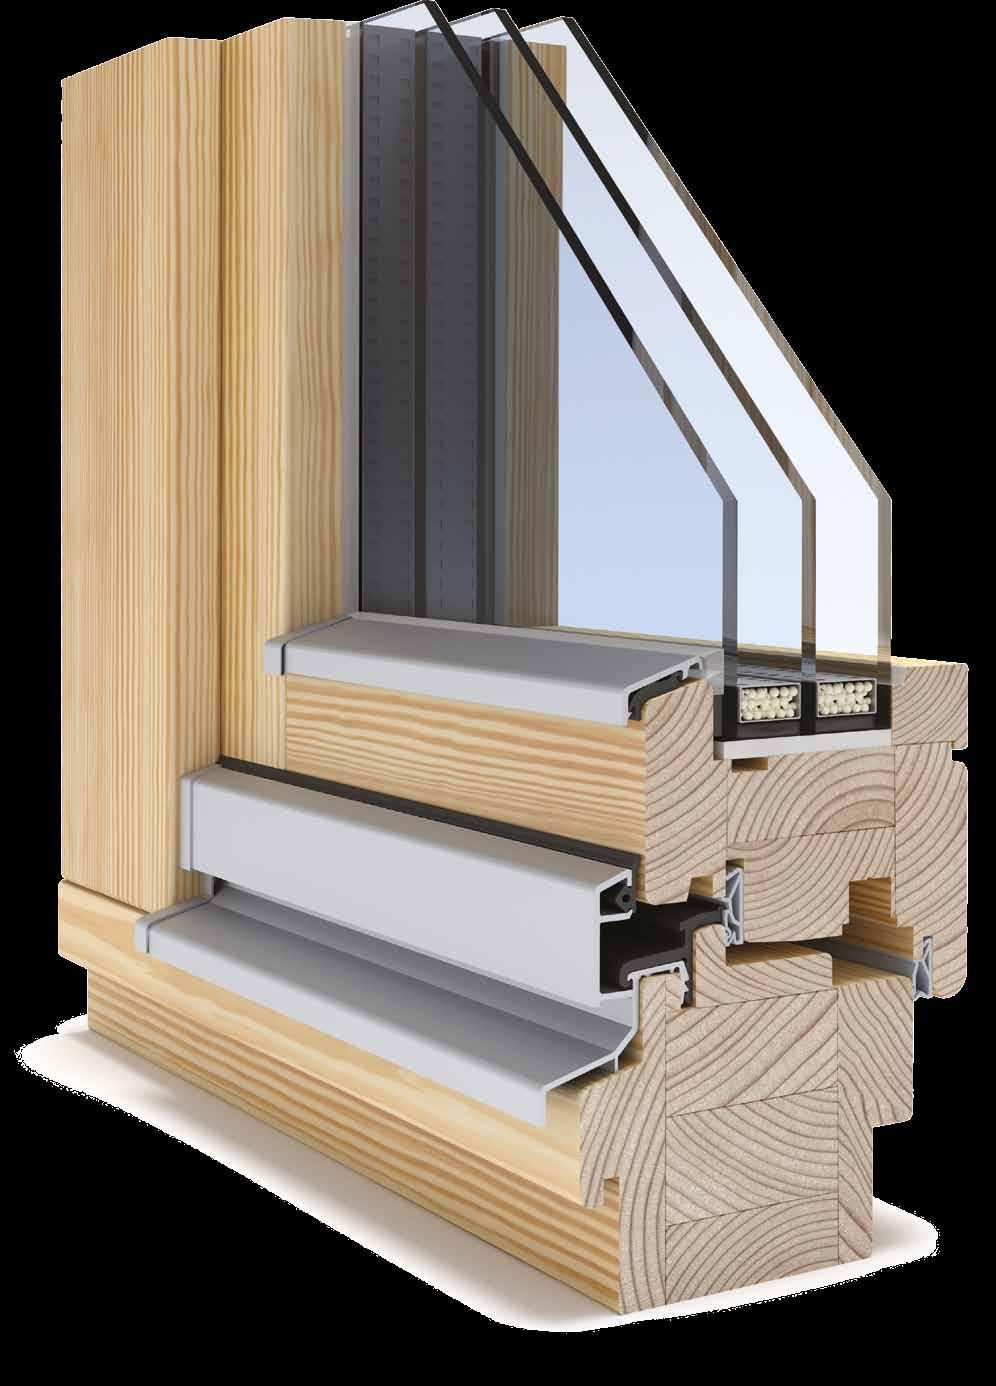 These windows have a high comfort of usage owing to three thickness dimensions of the sash profile, fulfilling the requirements of our most demanding clients.